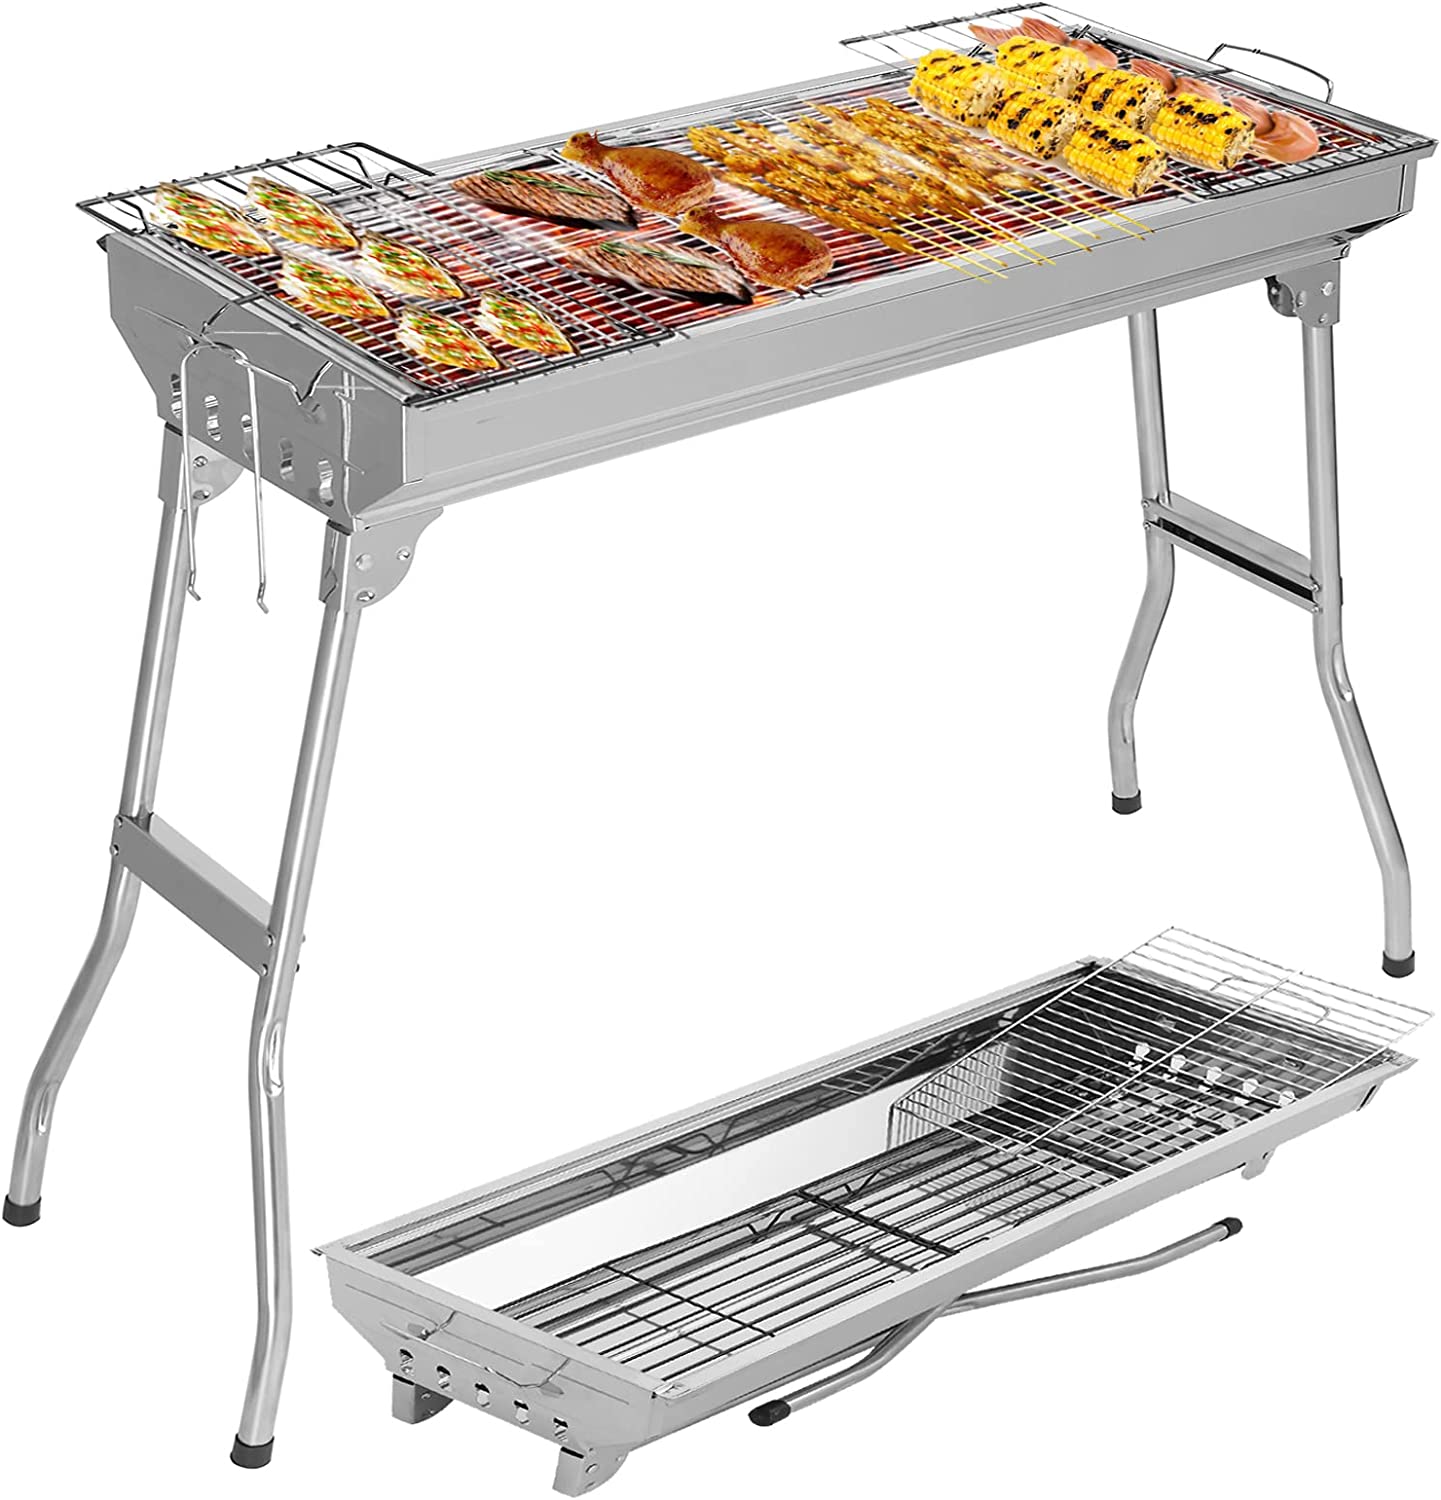 70*31*71cm Portable Stainless Steel BBQ Rack Grill